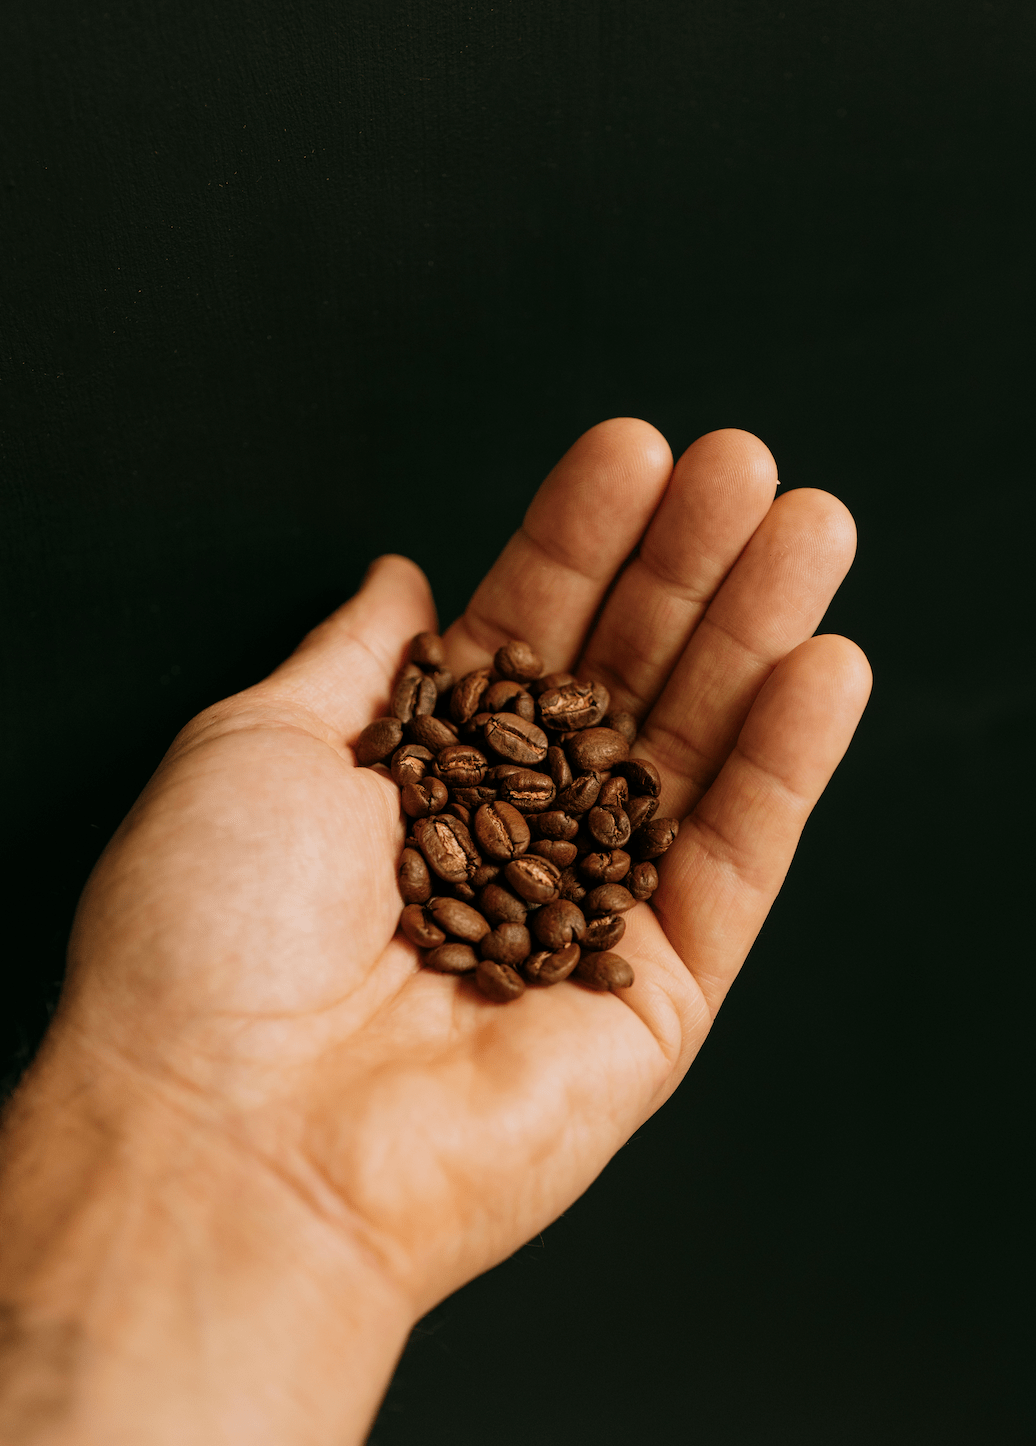 A hand holding Missing bean coffee roasters roasted coffee beans.